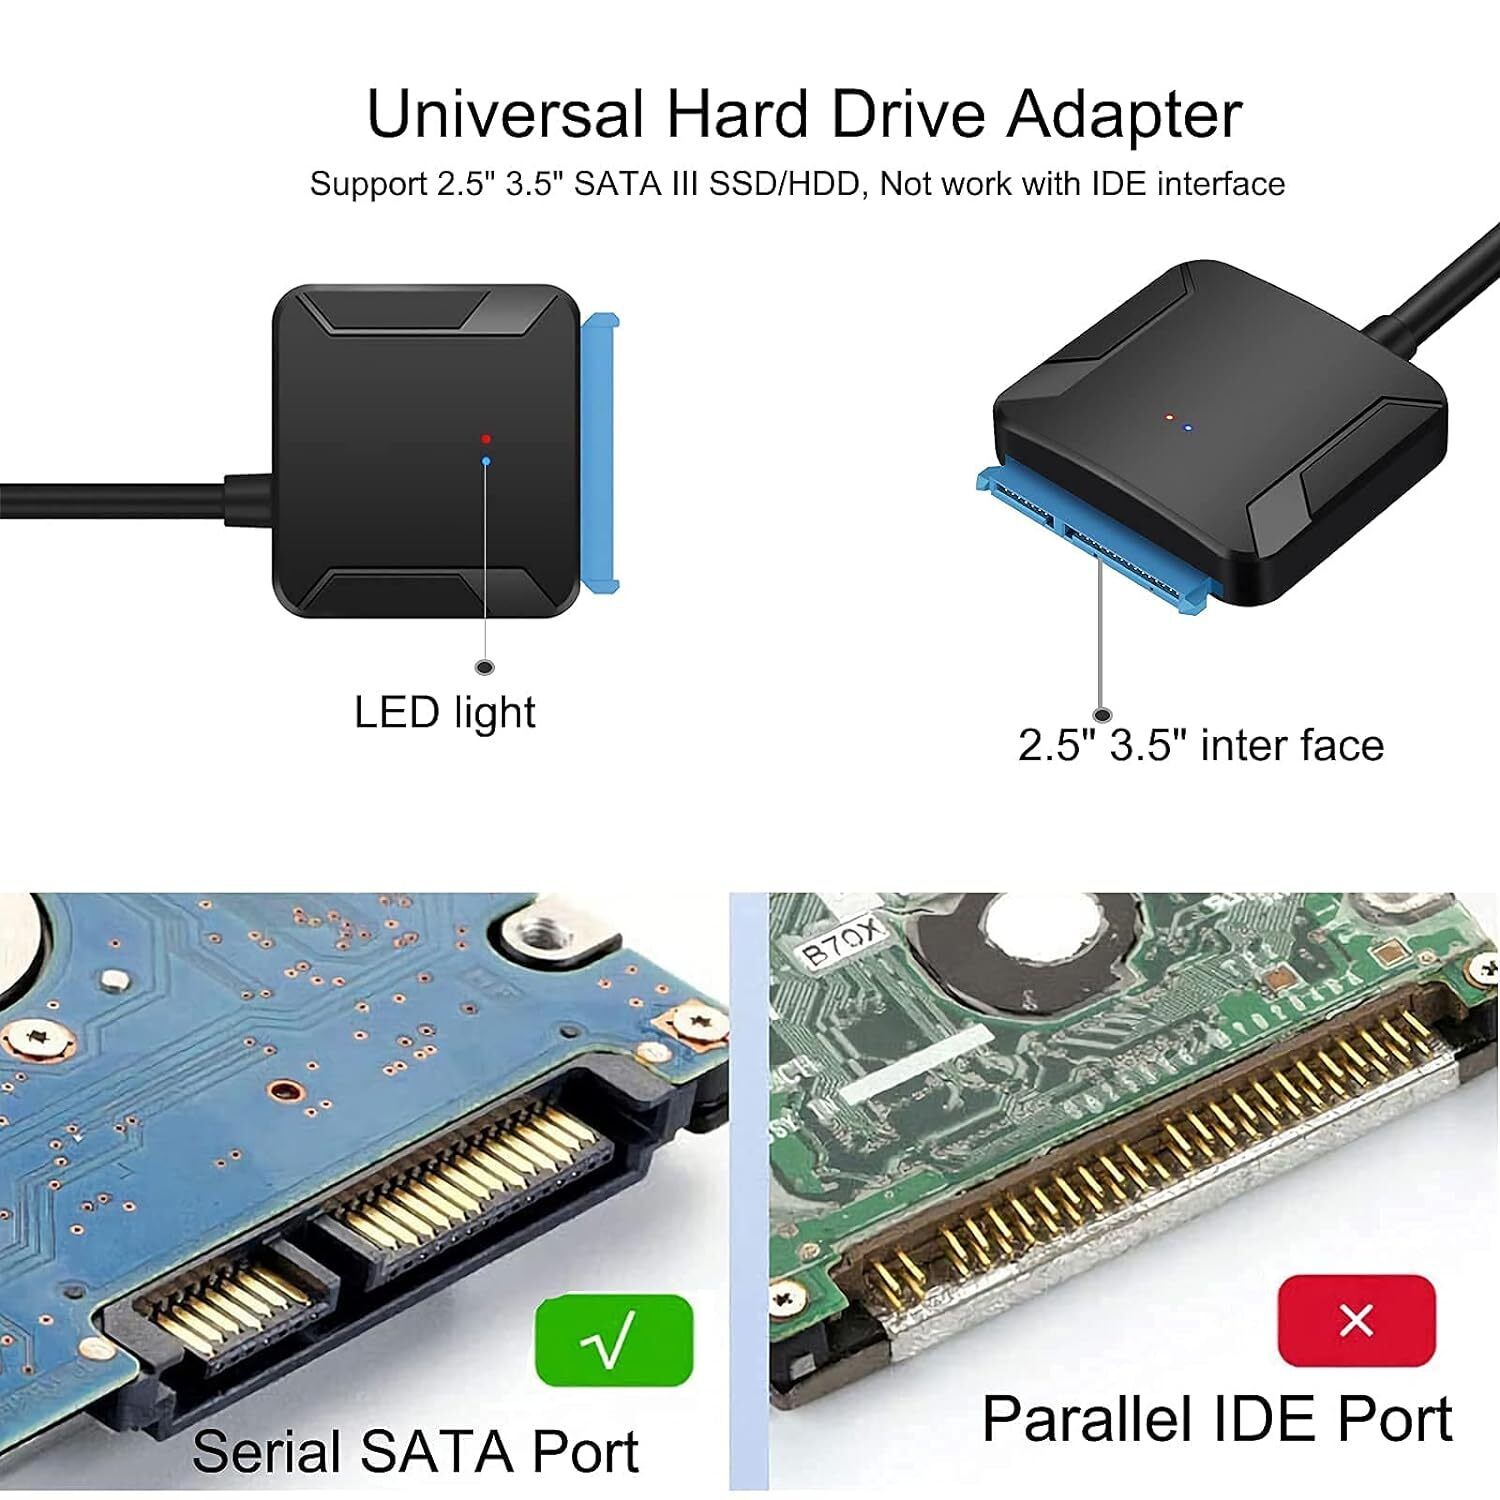 SATA to USB 3.0 Adapter Convertor Cable for 2.5" 3.5" HDD SSD Hard Drive US Ship UVOOI Does Not Apply - фотография #8